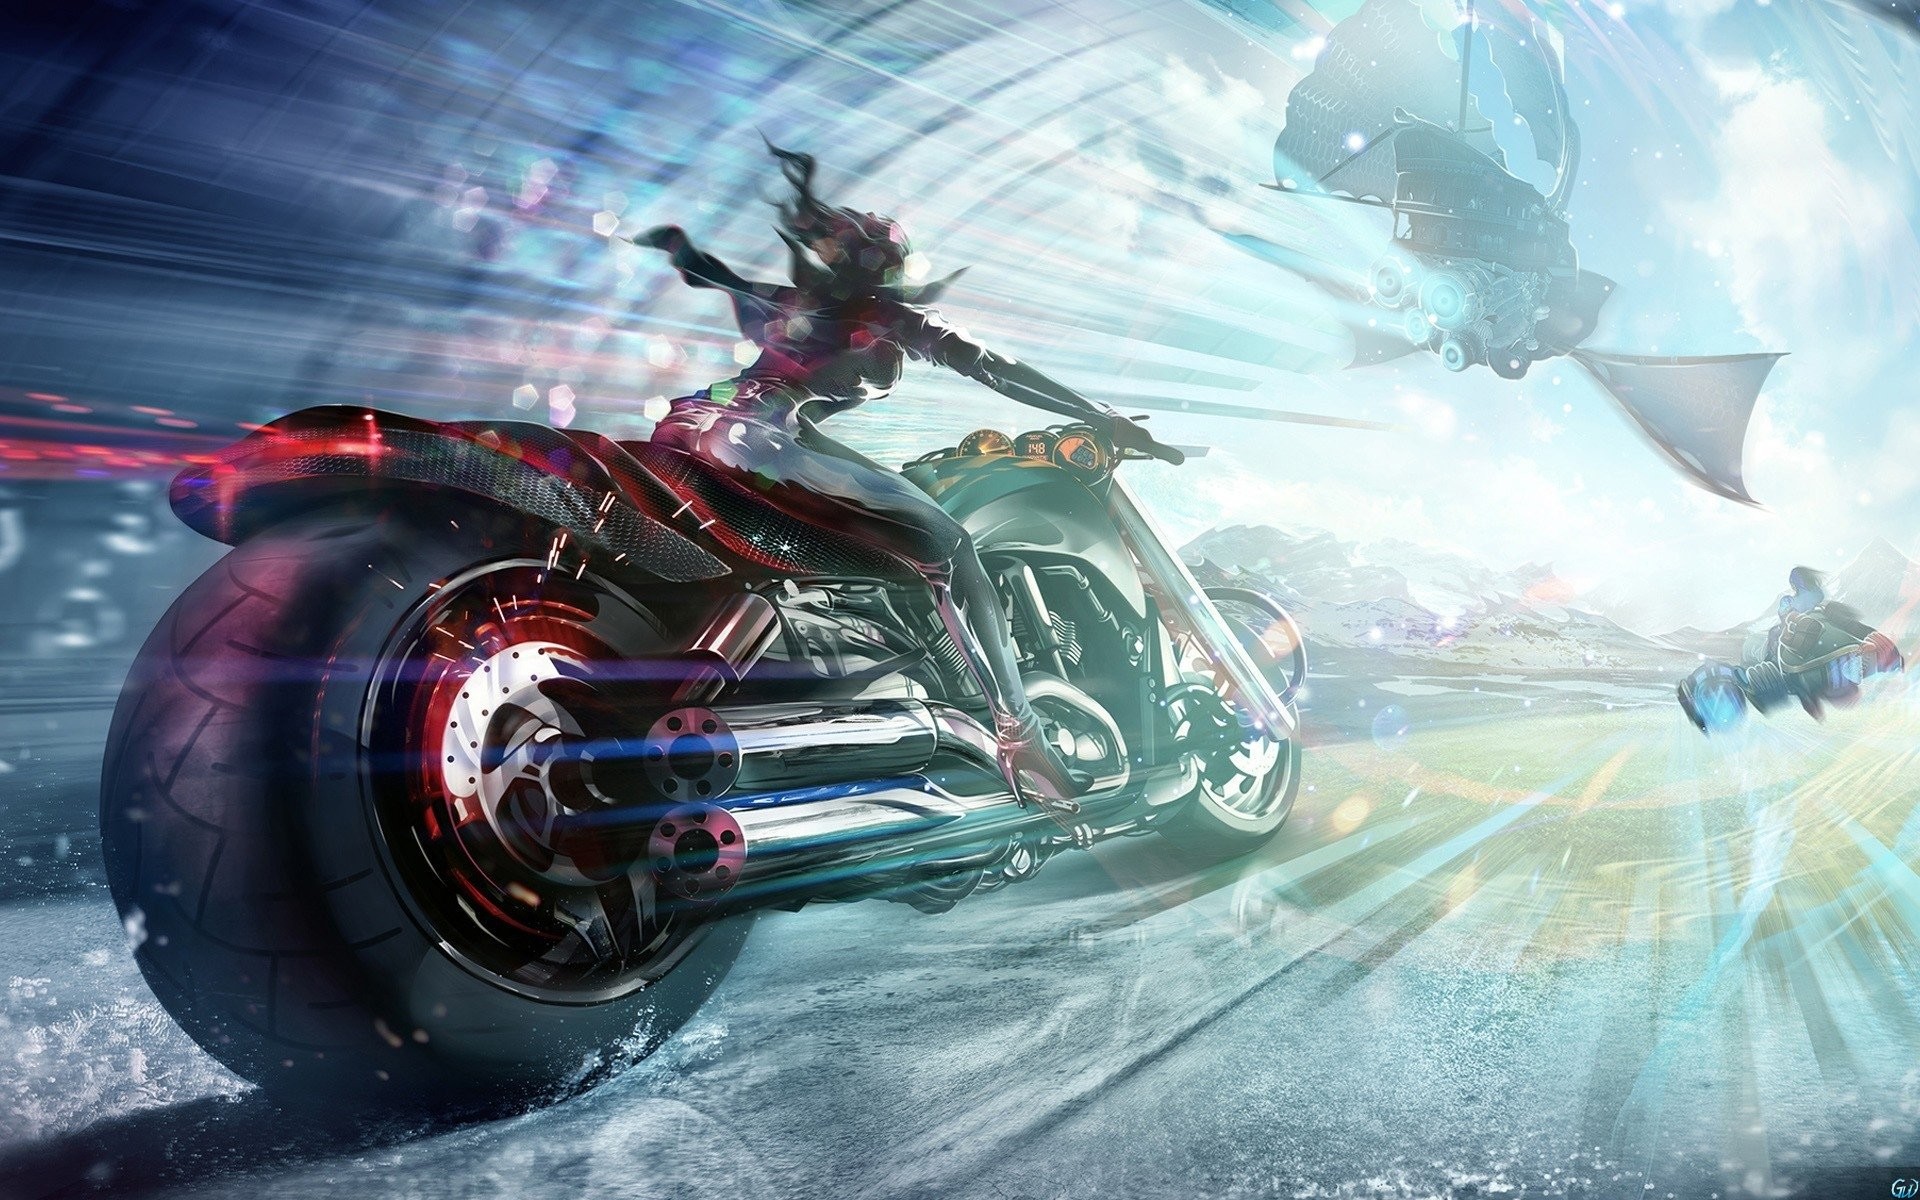 1920x1200 Futuristic Bike Girl Wallpaper featuring motorbikes, flying boats and jet  cars. This stunning digital artwork is a fast-paced and colorful wallpaper.